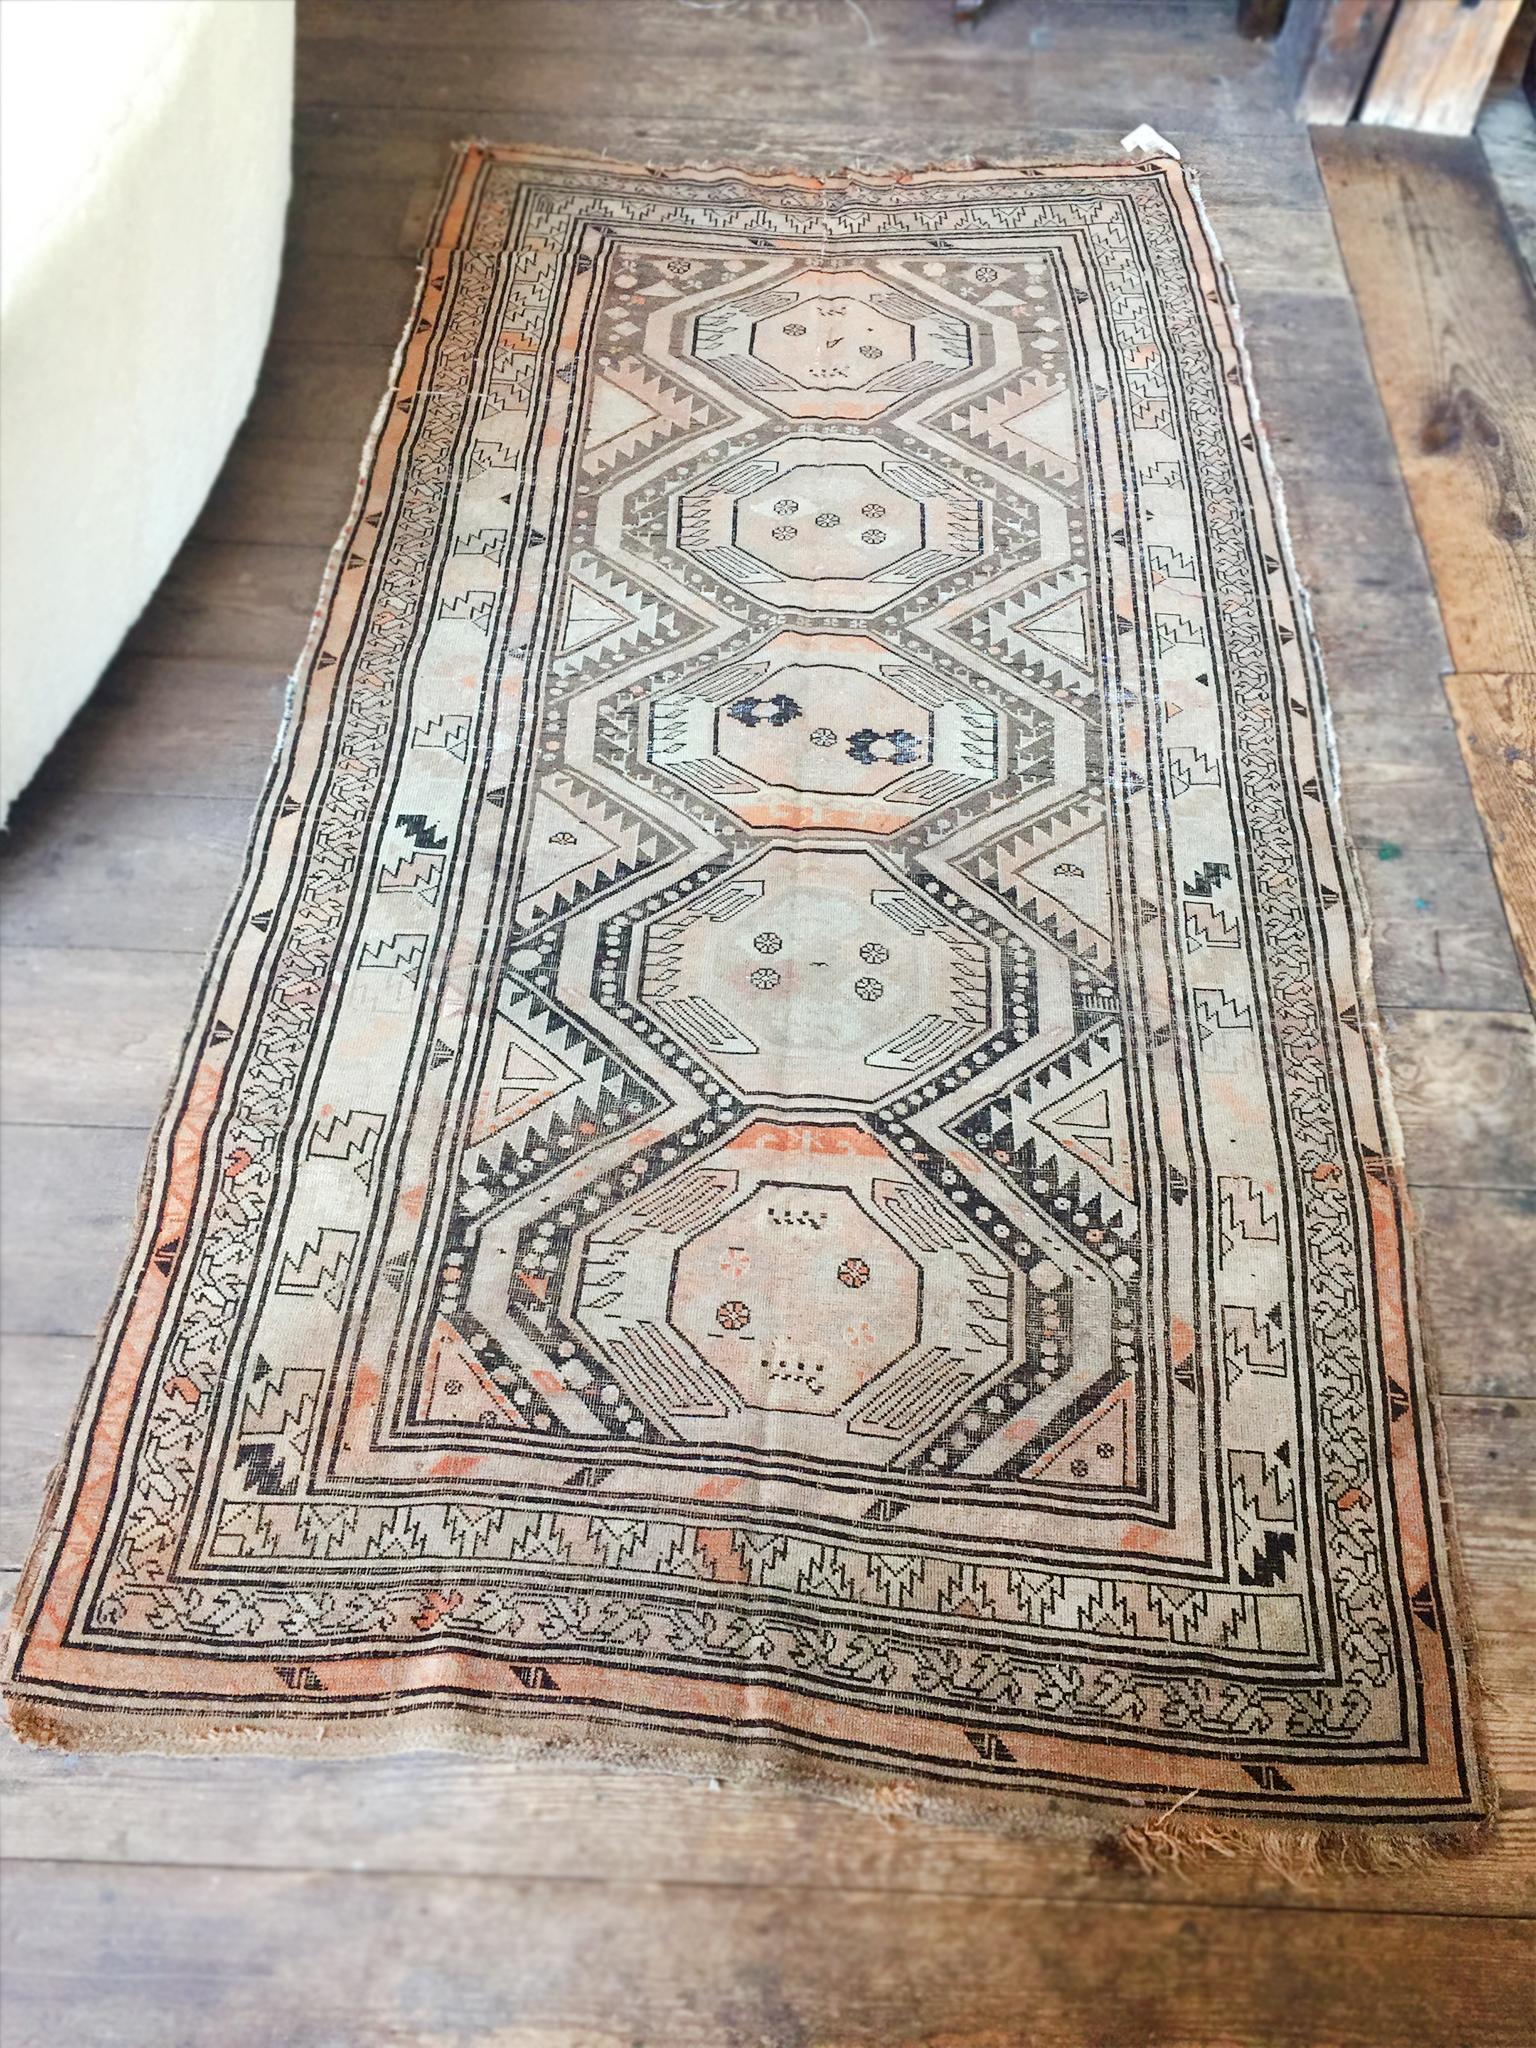 This antique Turkoman runner rug was handwoven in the late 19th-early 20th century. It is comprised of hand-dyed wool, with a palette of brown, tan, ivory, and hints of orange. The main design is a bold series of geometric medallions that run